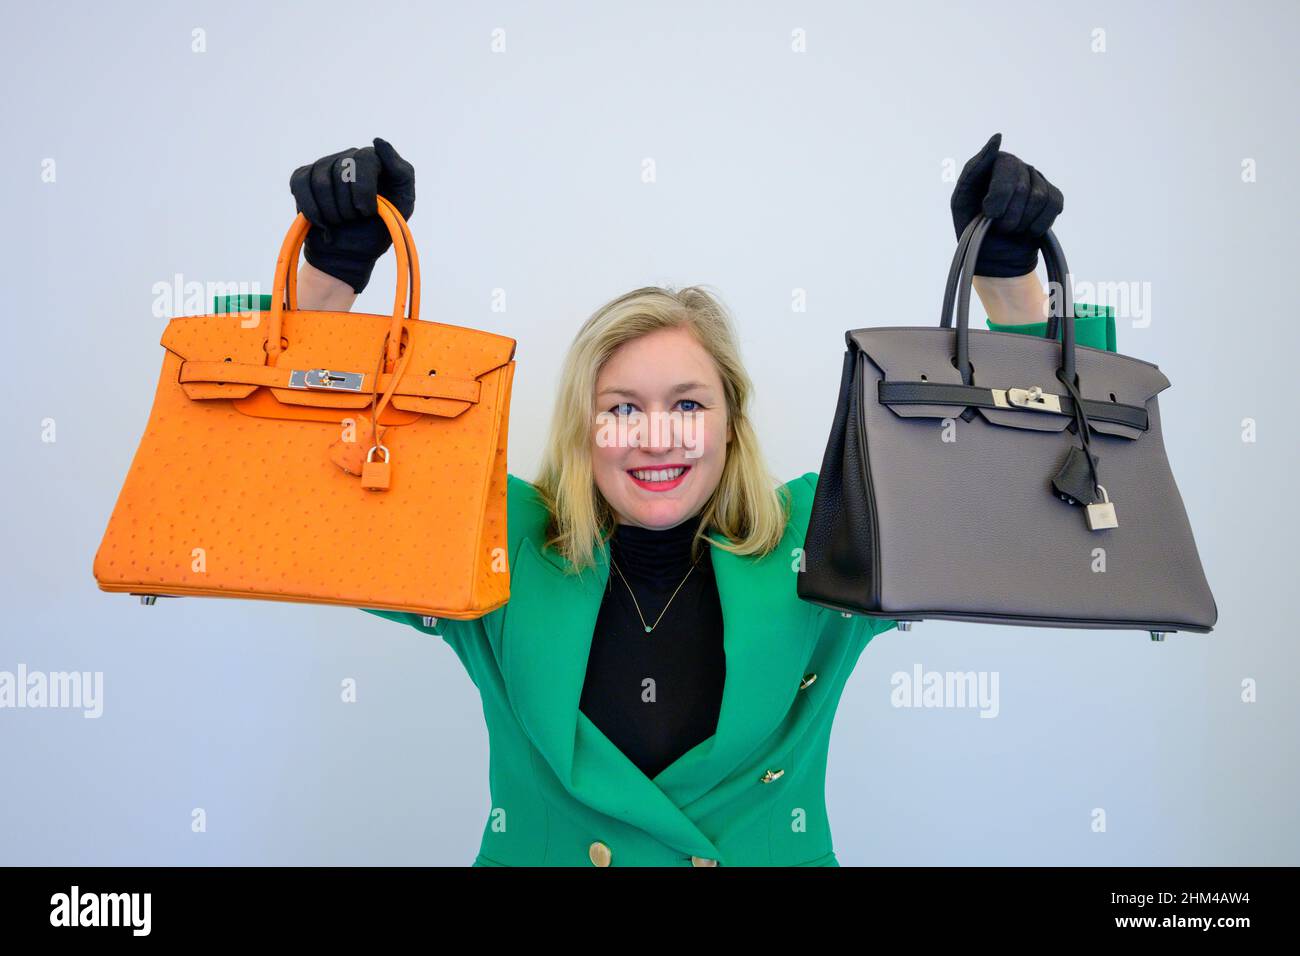 Bonhams, London, UK. 7 February 2022. Fashion sale preview with bags  representing the great houses from Chanel and Hermès to Prada and Gucci.  Image: (left): Among the bags, an Orange H Ostrich